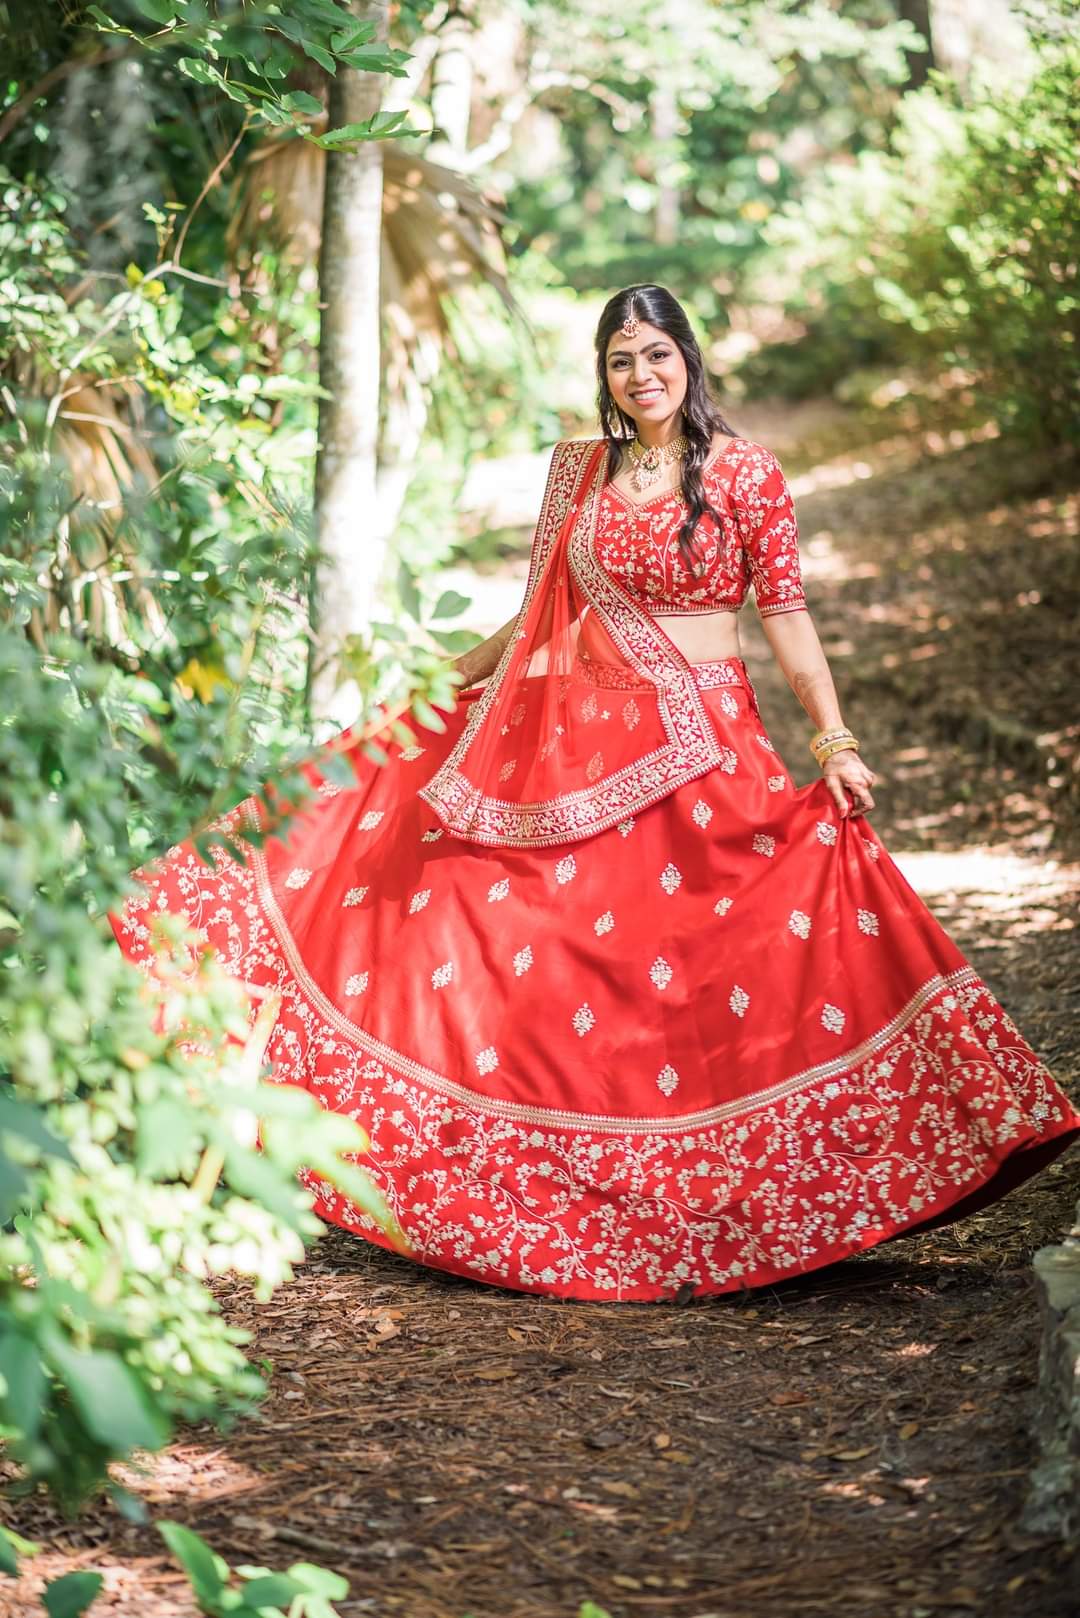 Indian Bride with Beautiful Dress